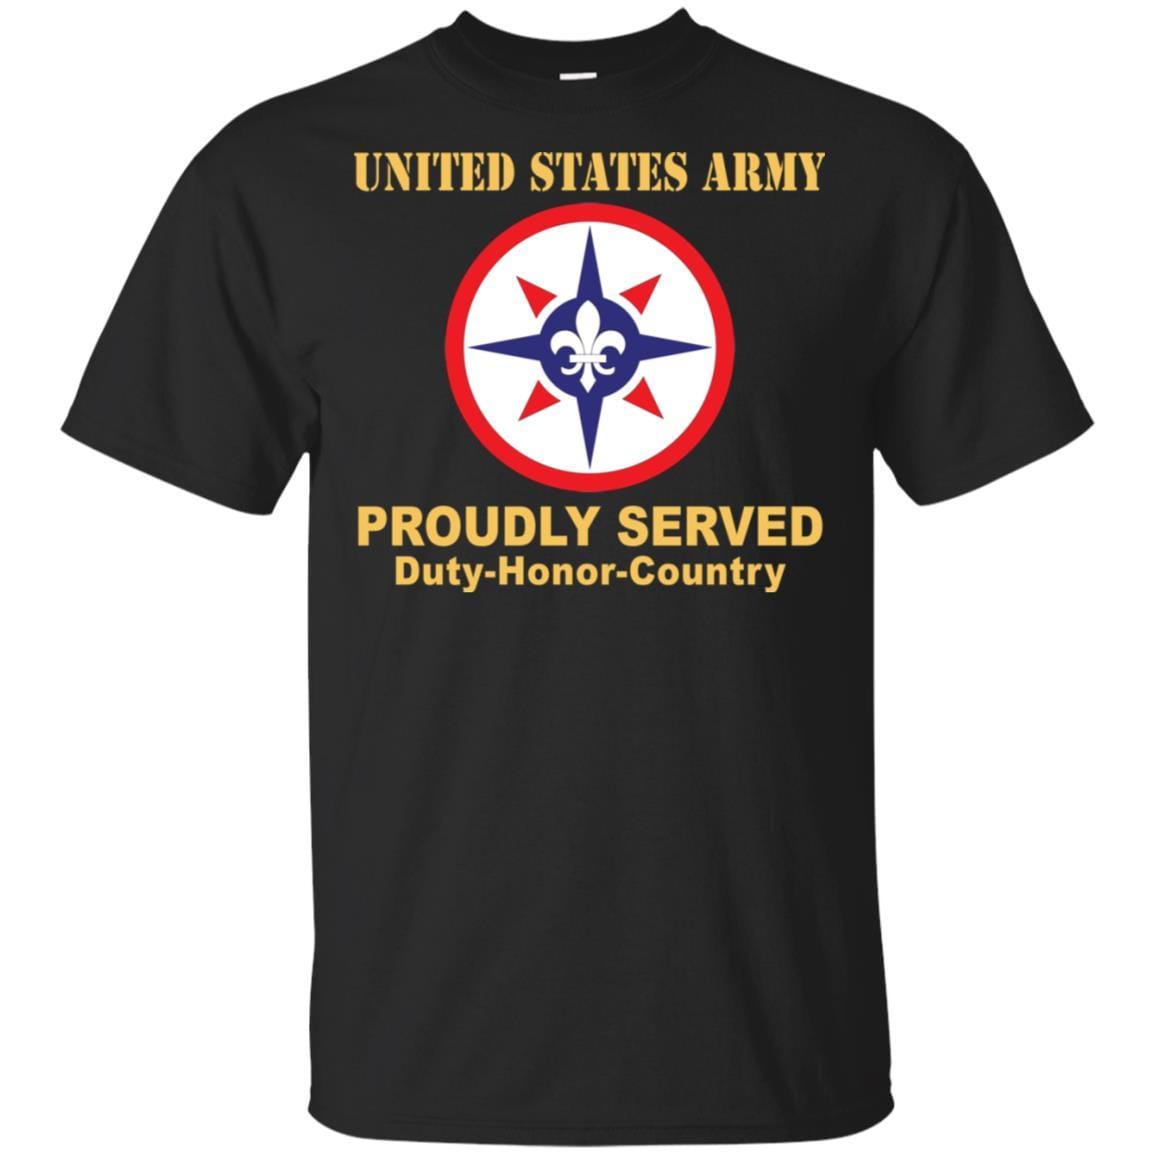 US ARMY 316TH SUSTAINMENT COMMAND- Proudly Served T-Shirt On Front For Men-TShirt-Army-Veterans Nation